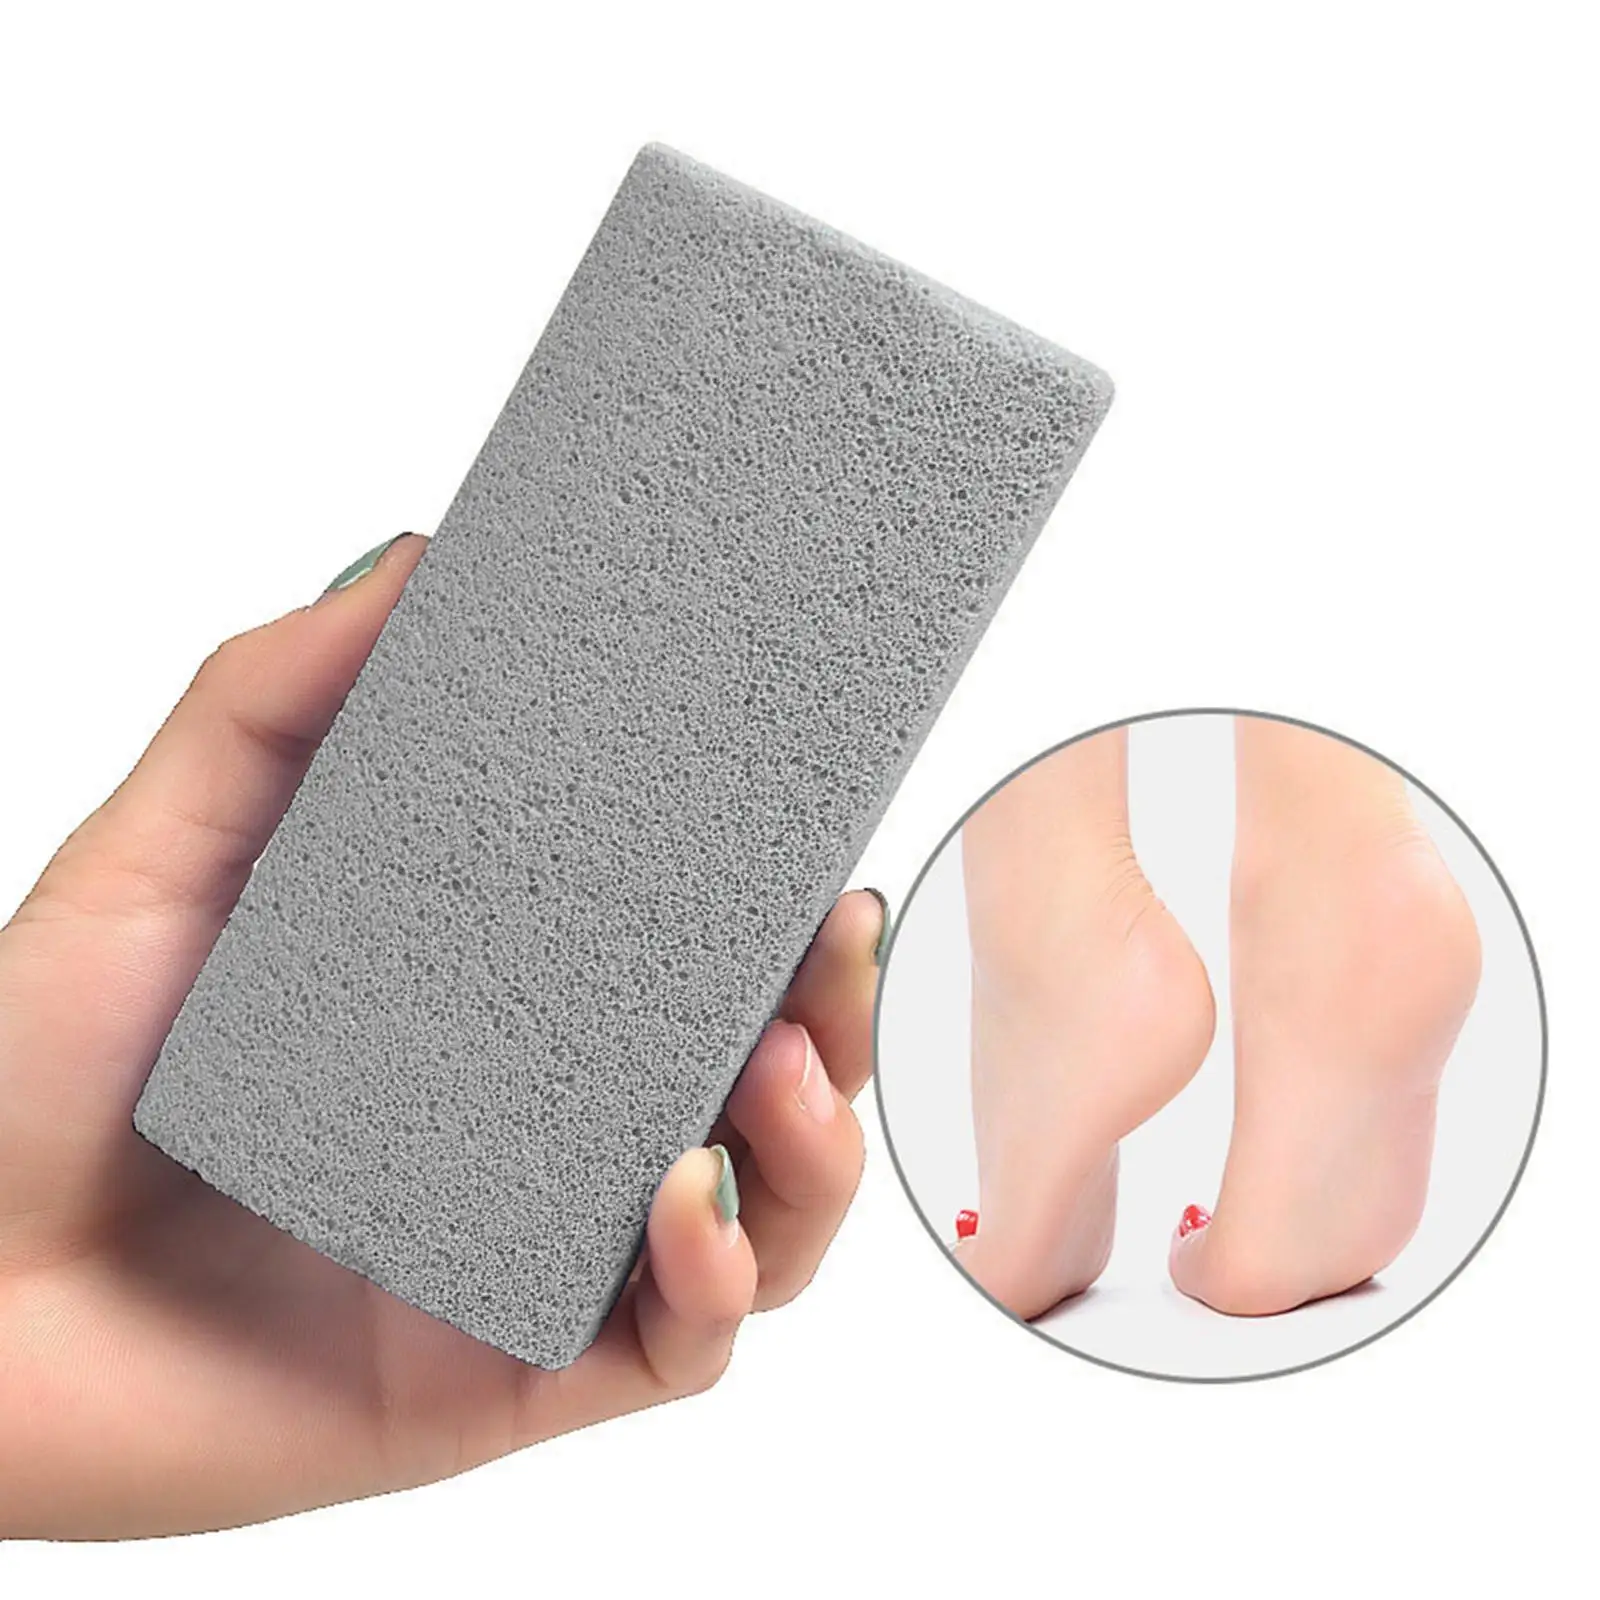 Cuboid Foot Pumice Stones Exfoliator Tool Foot Callus Remover Scrubber for Dead Hard Skin Feet Hands Grinding Pedicure Daily Use